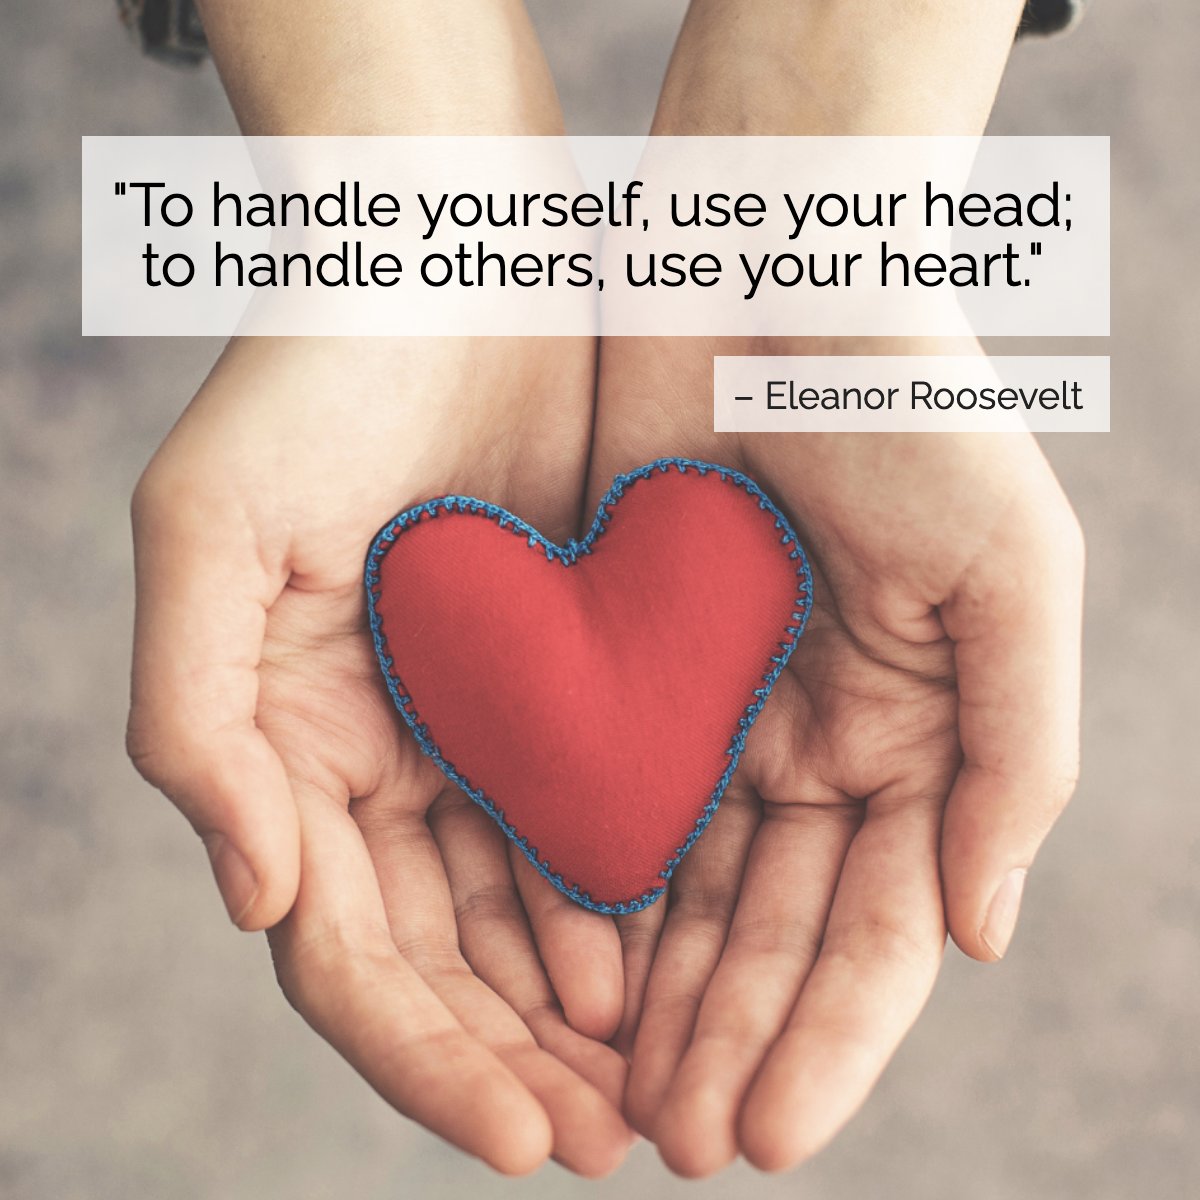 Eleanor Roosevelt was an American political figure, diplomat, and activist. 

She served as the first lady of the United States from 1933 to 1945!

#inspiring #quote #eleanorroosevelt #inspirational